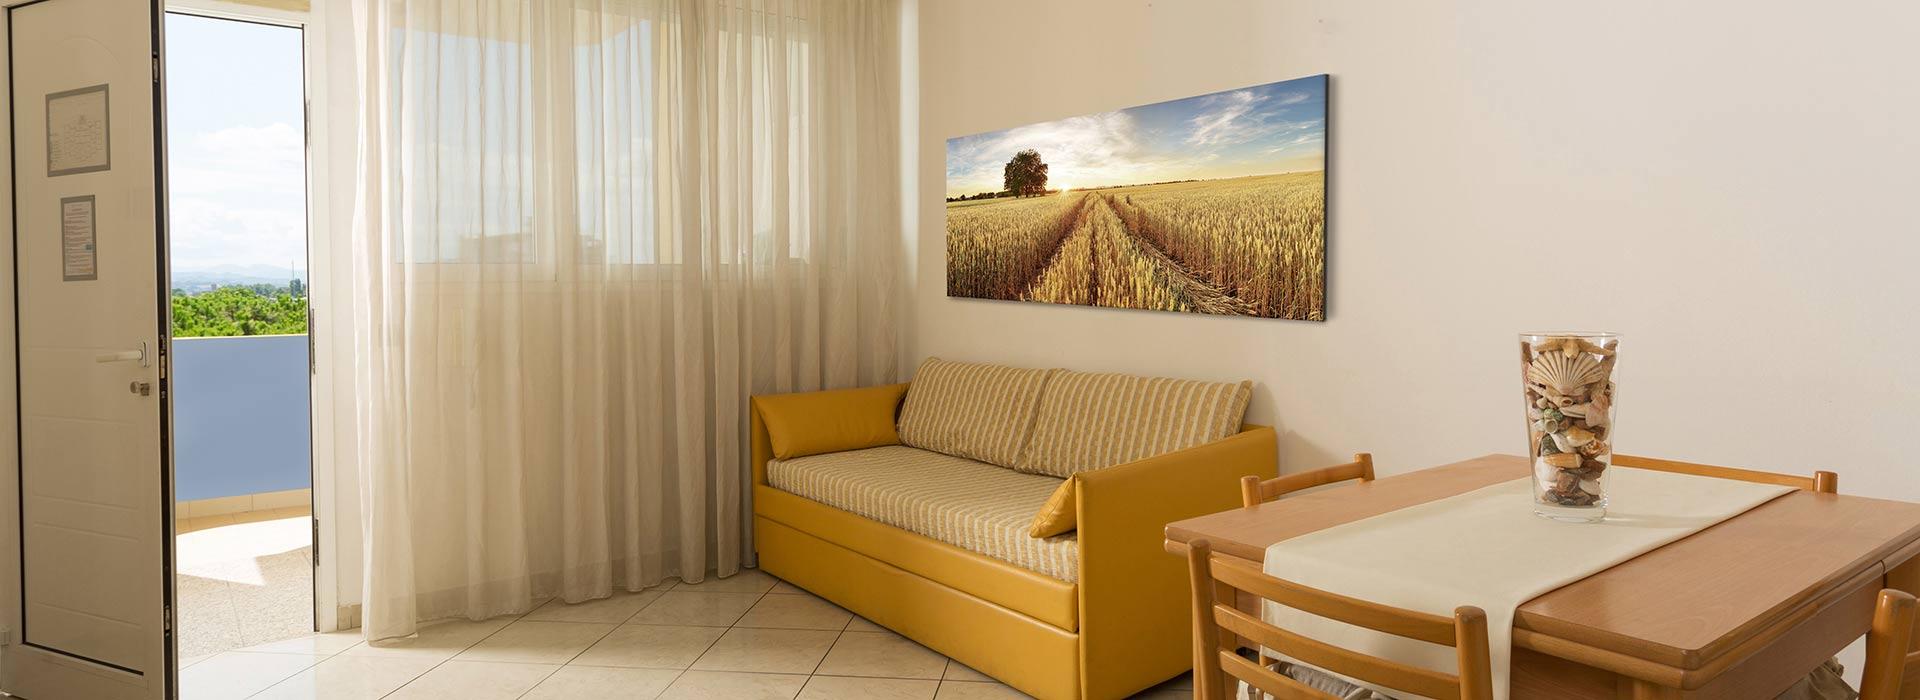 hotelpiccadilly it residence-rimini-mare 001